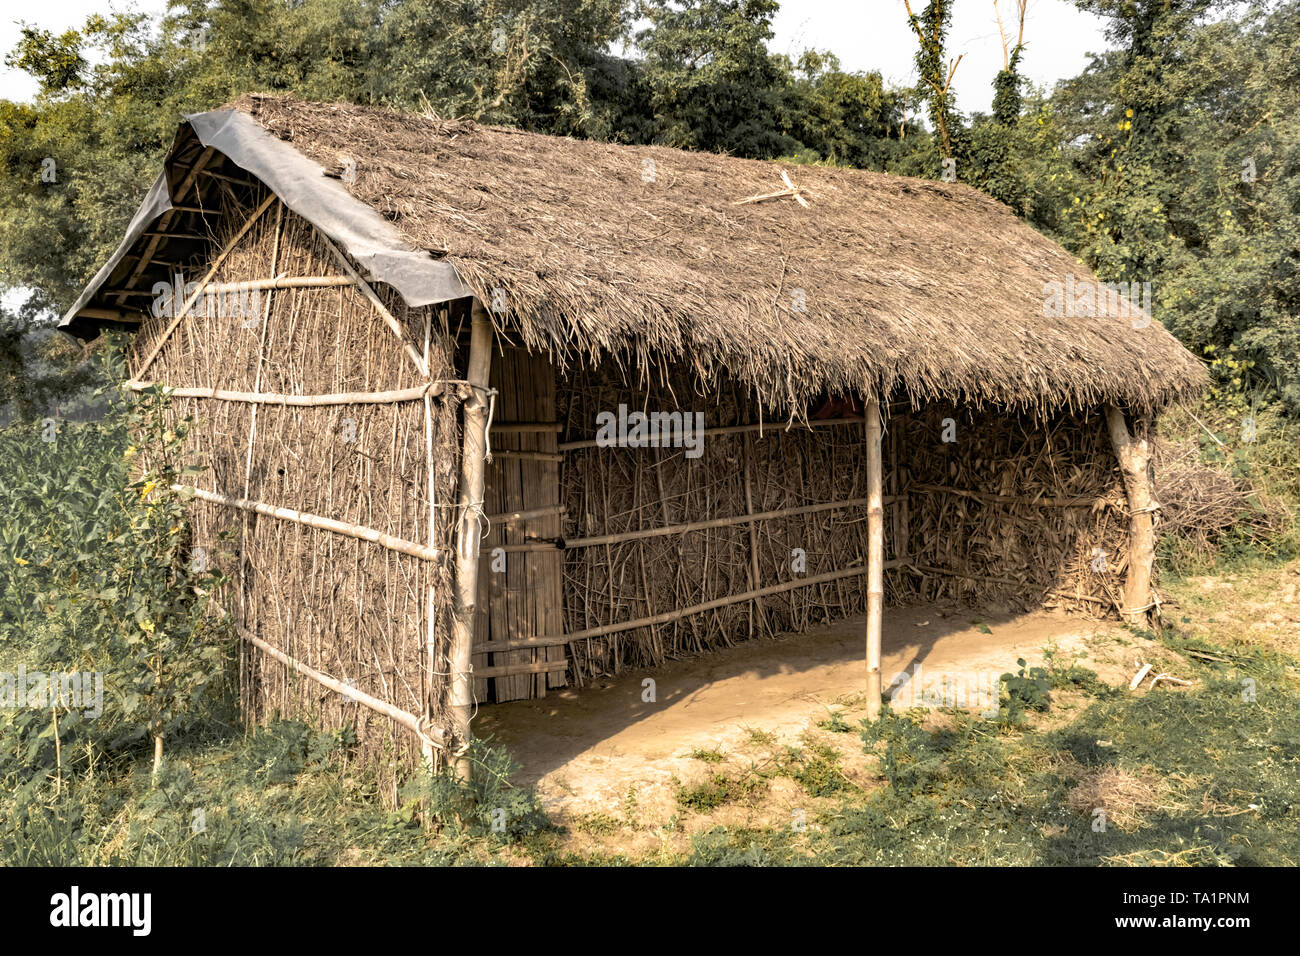 Tribal Hut having thatched roof, made of Bamboo Straws & sticks, are common in Tribal areas and are temporary and regulate temperature in natural way. Stock Photo